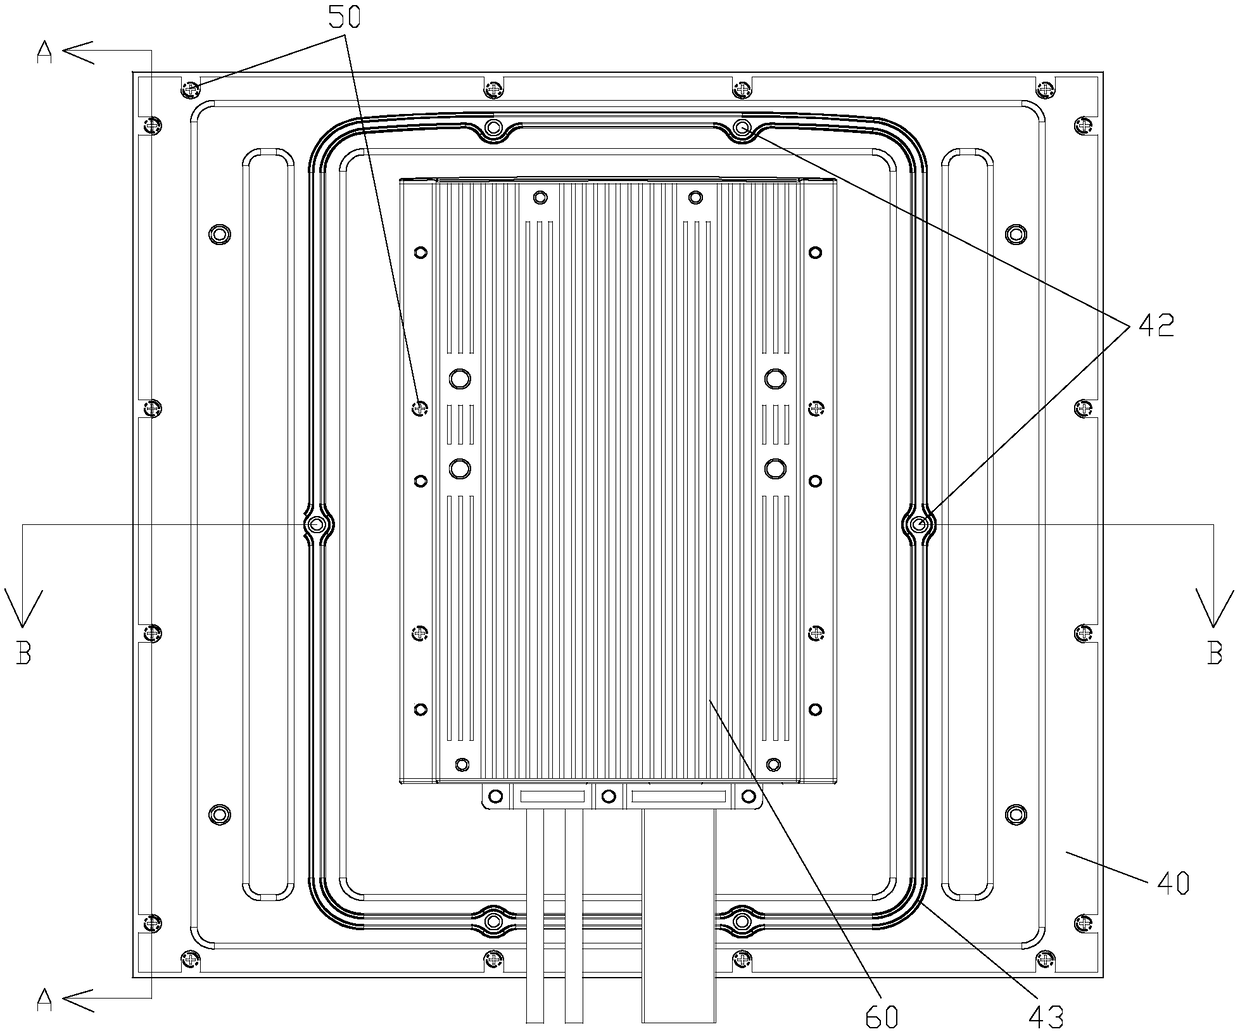 Double-heat-conductive-piece clamping-plate-type LED display unit module